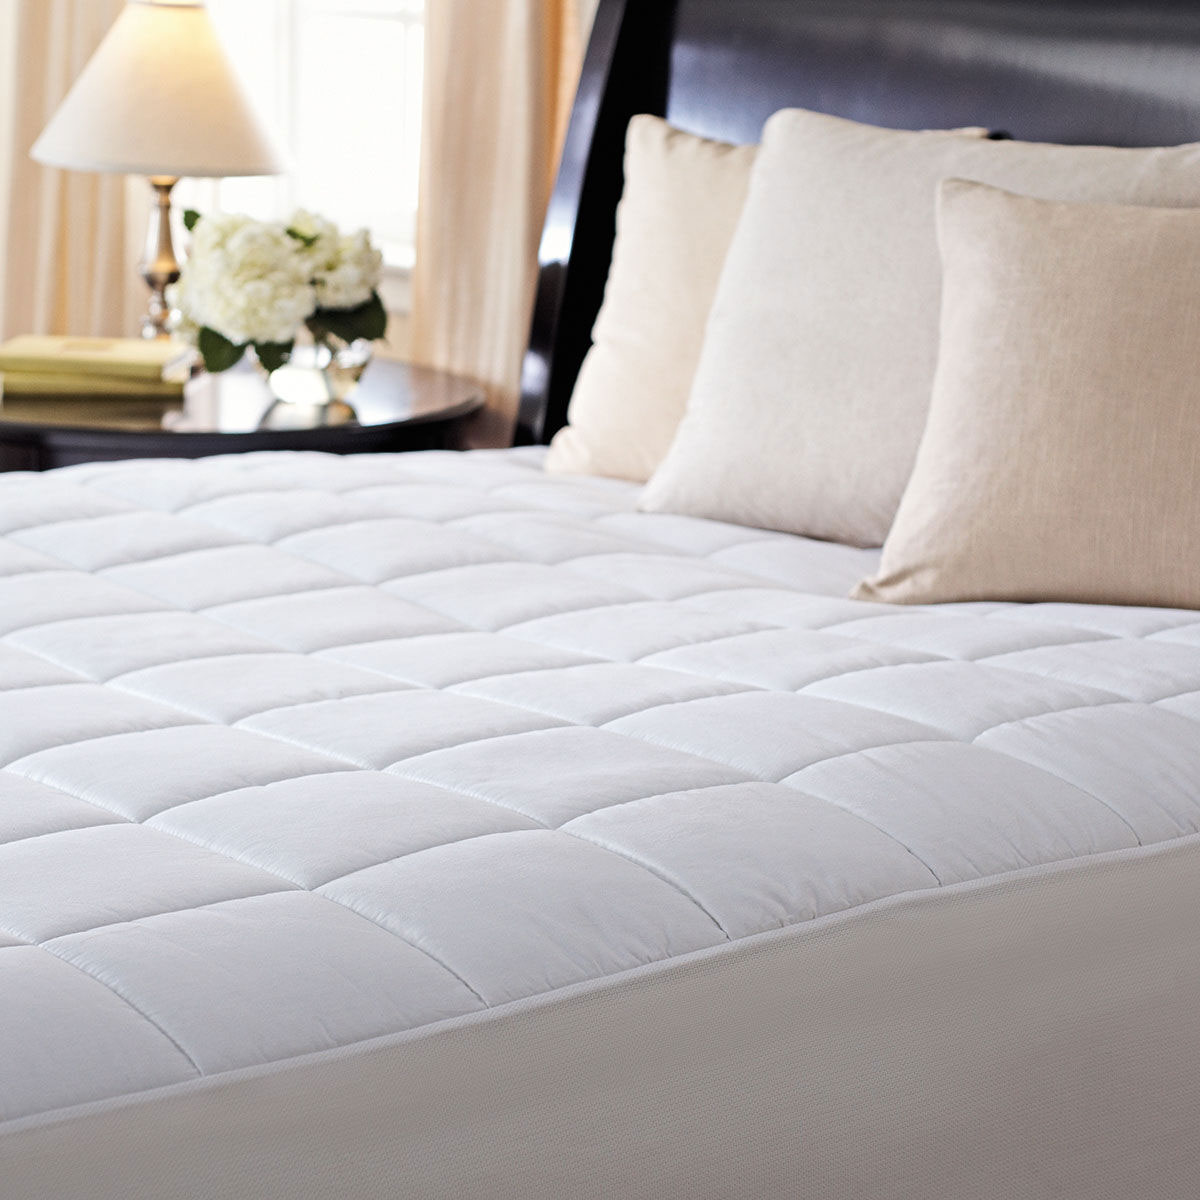 Sunbeam Premium Quilted Electric Heated Warming Mattress Pad - Full Size